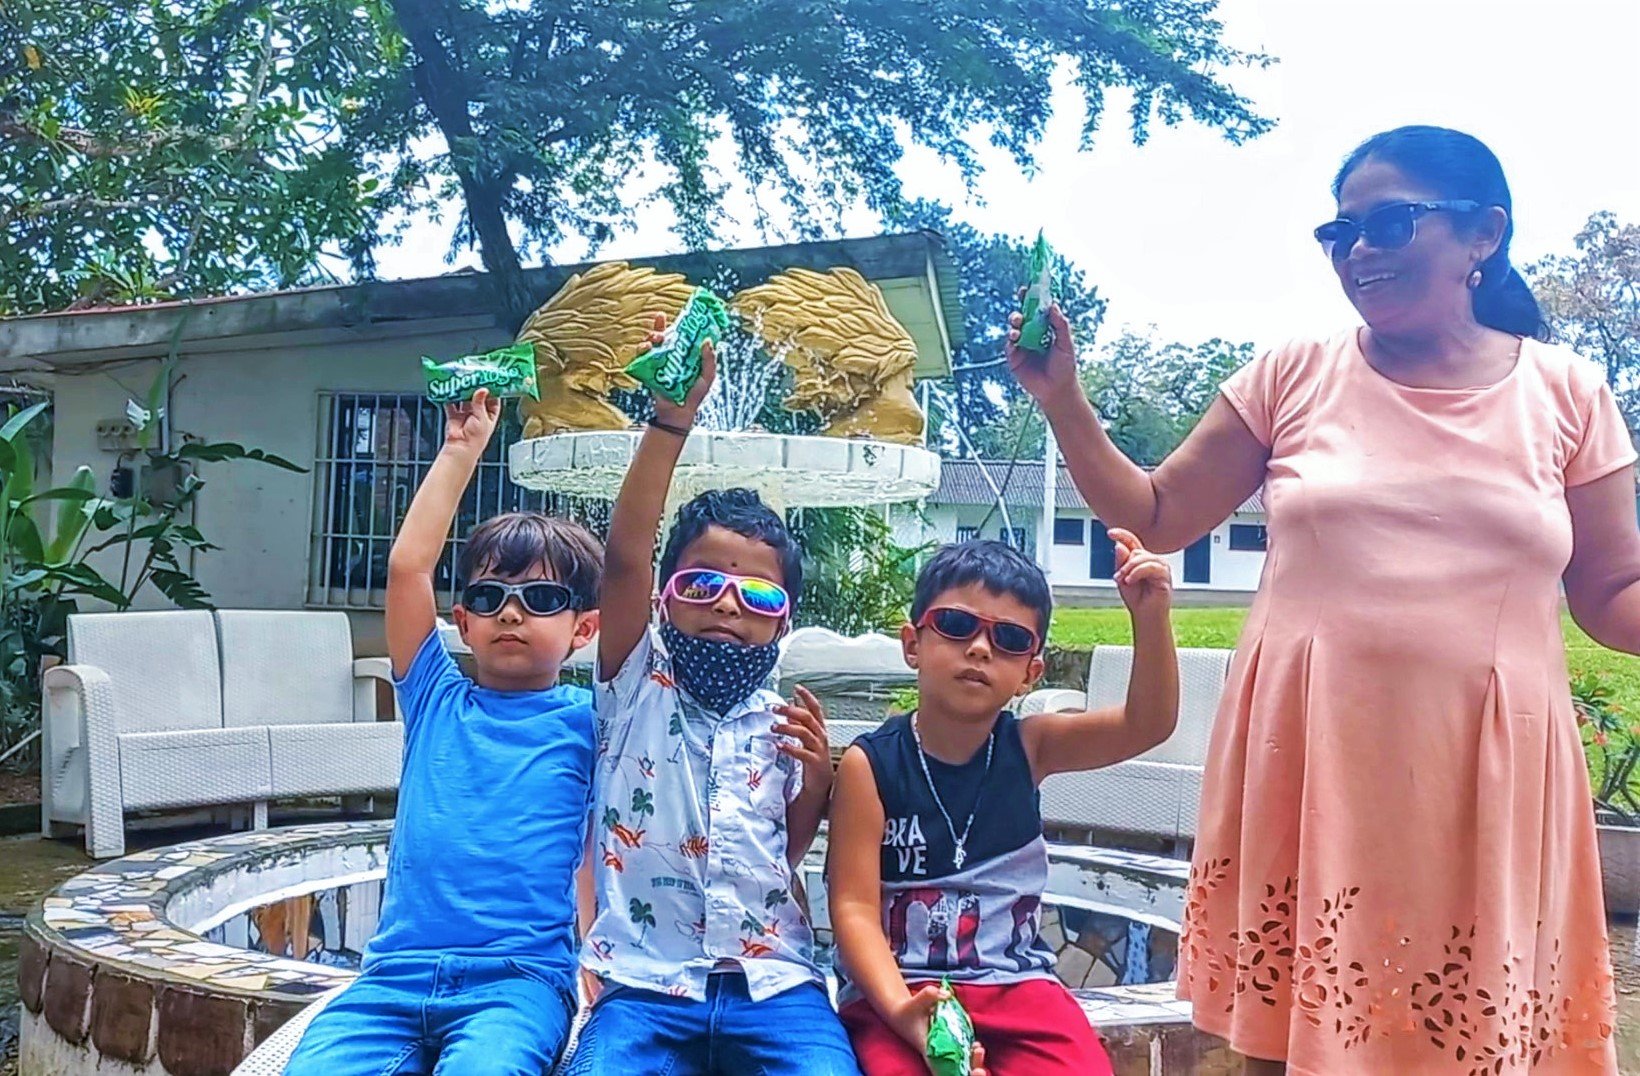  Pre-Kg and Kg: "English-as-a-Second-Language" students took a trip outside with Ms. Seema, to learn English vocabulary associated with "a sunny day." 